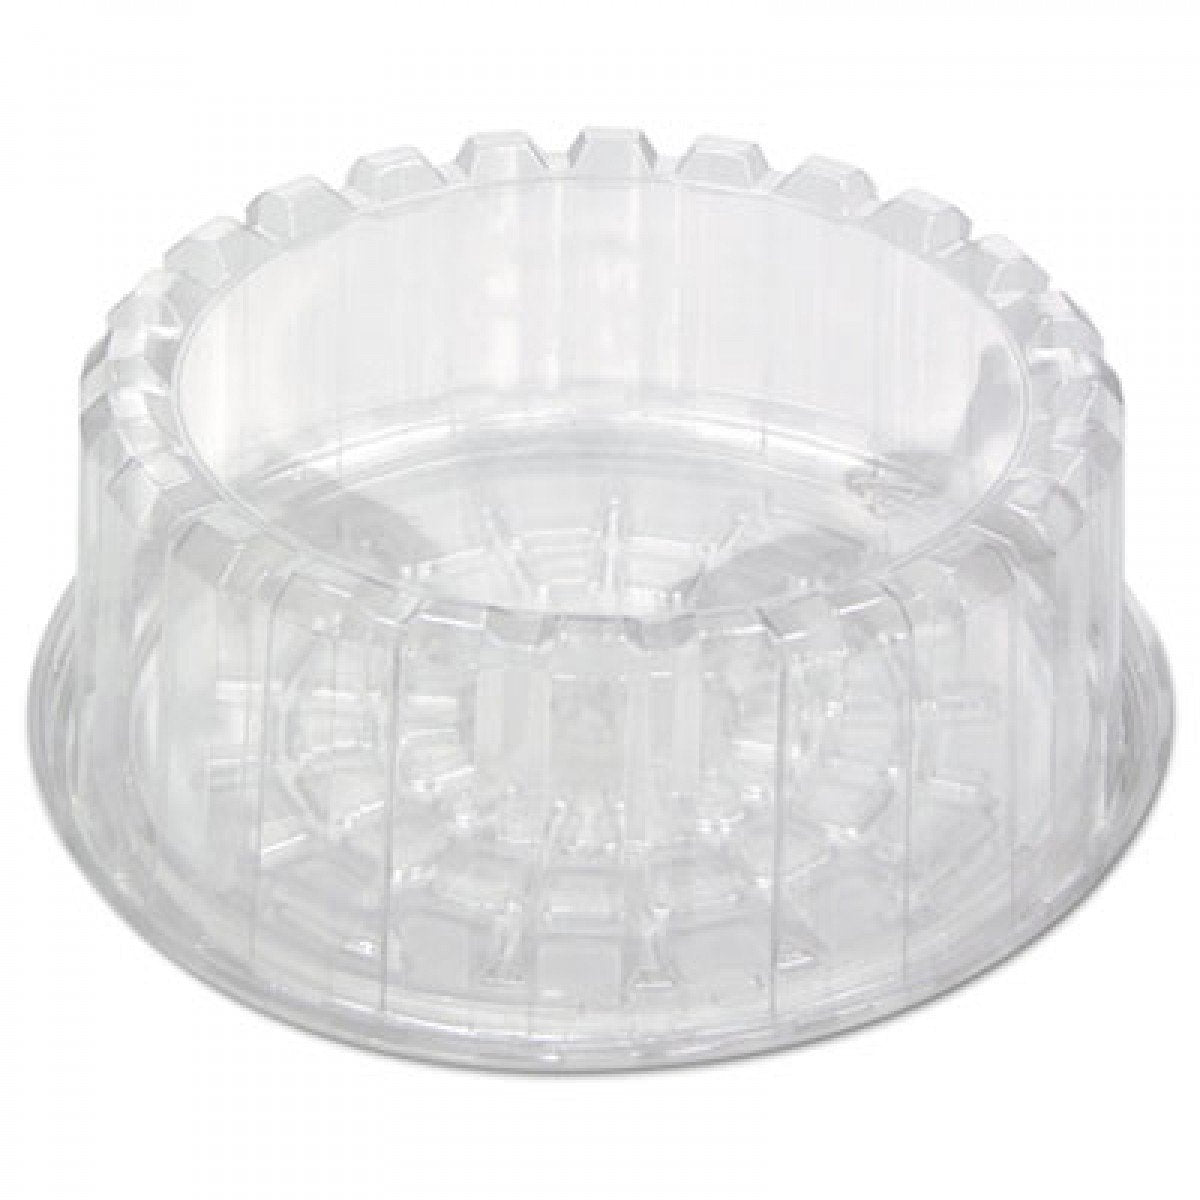 9" Cake Dome Containers - Gafbros